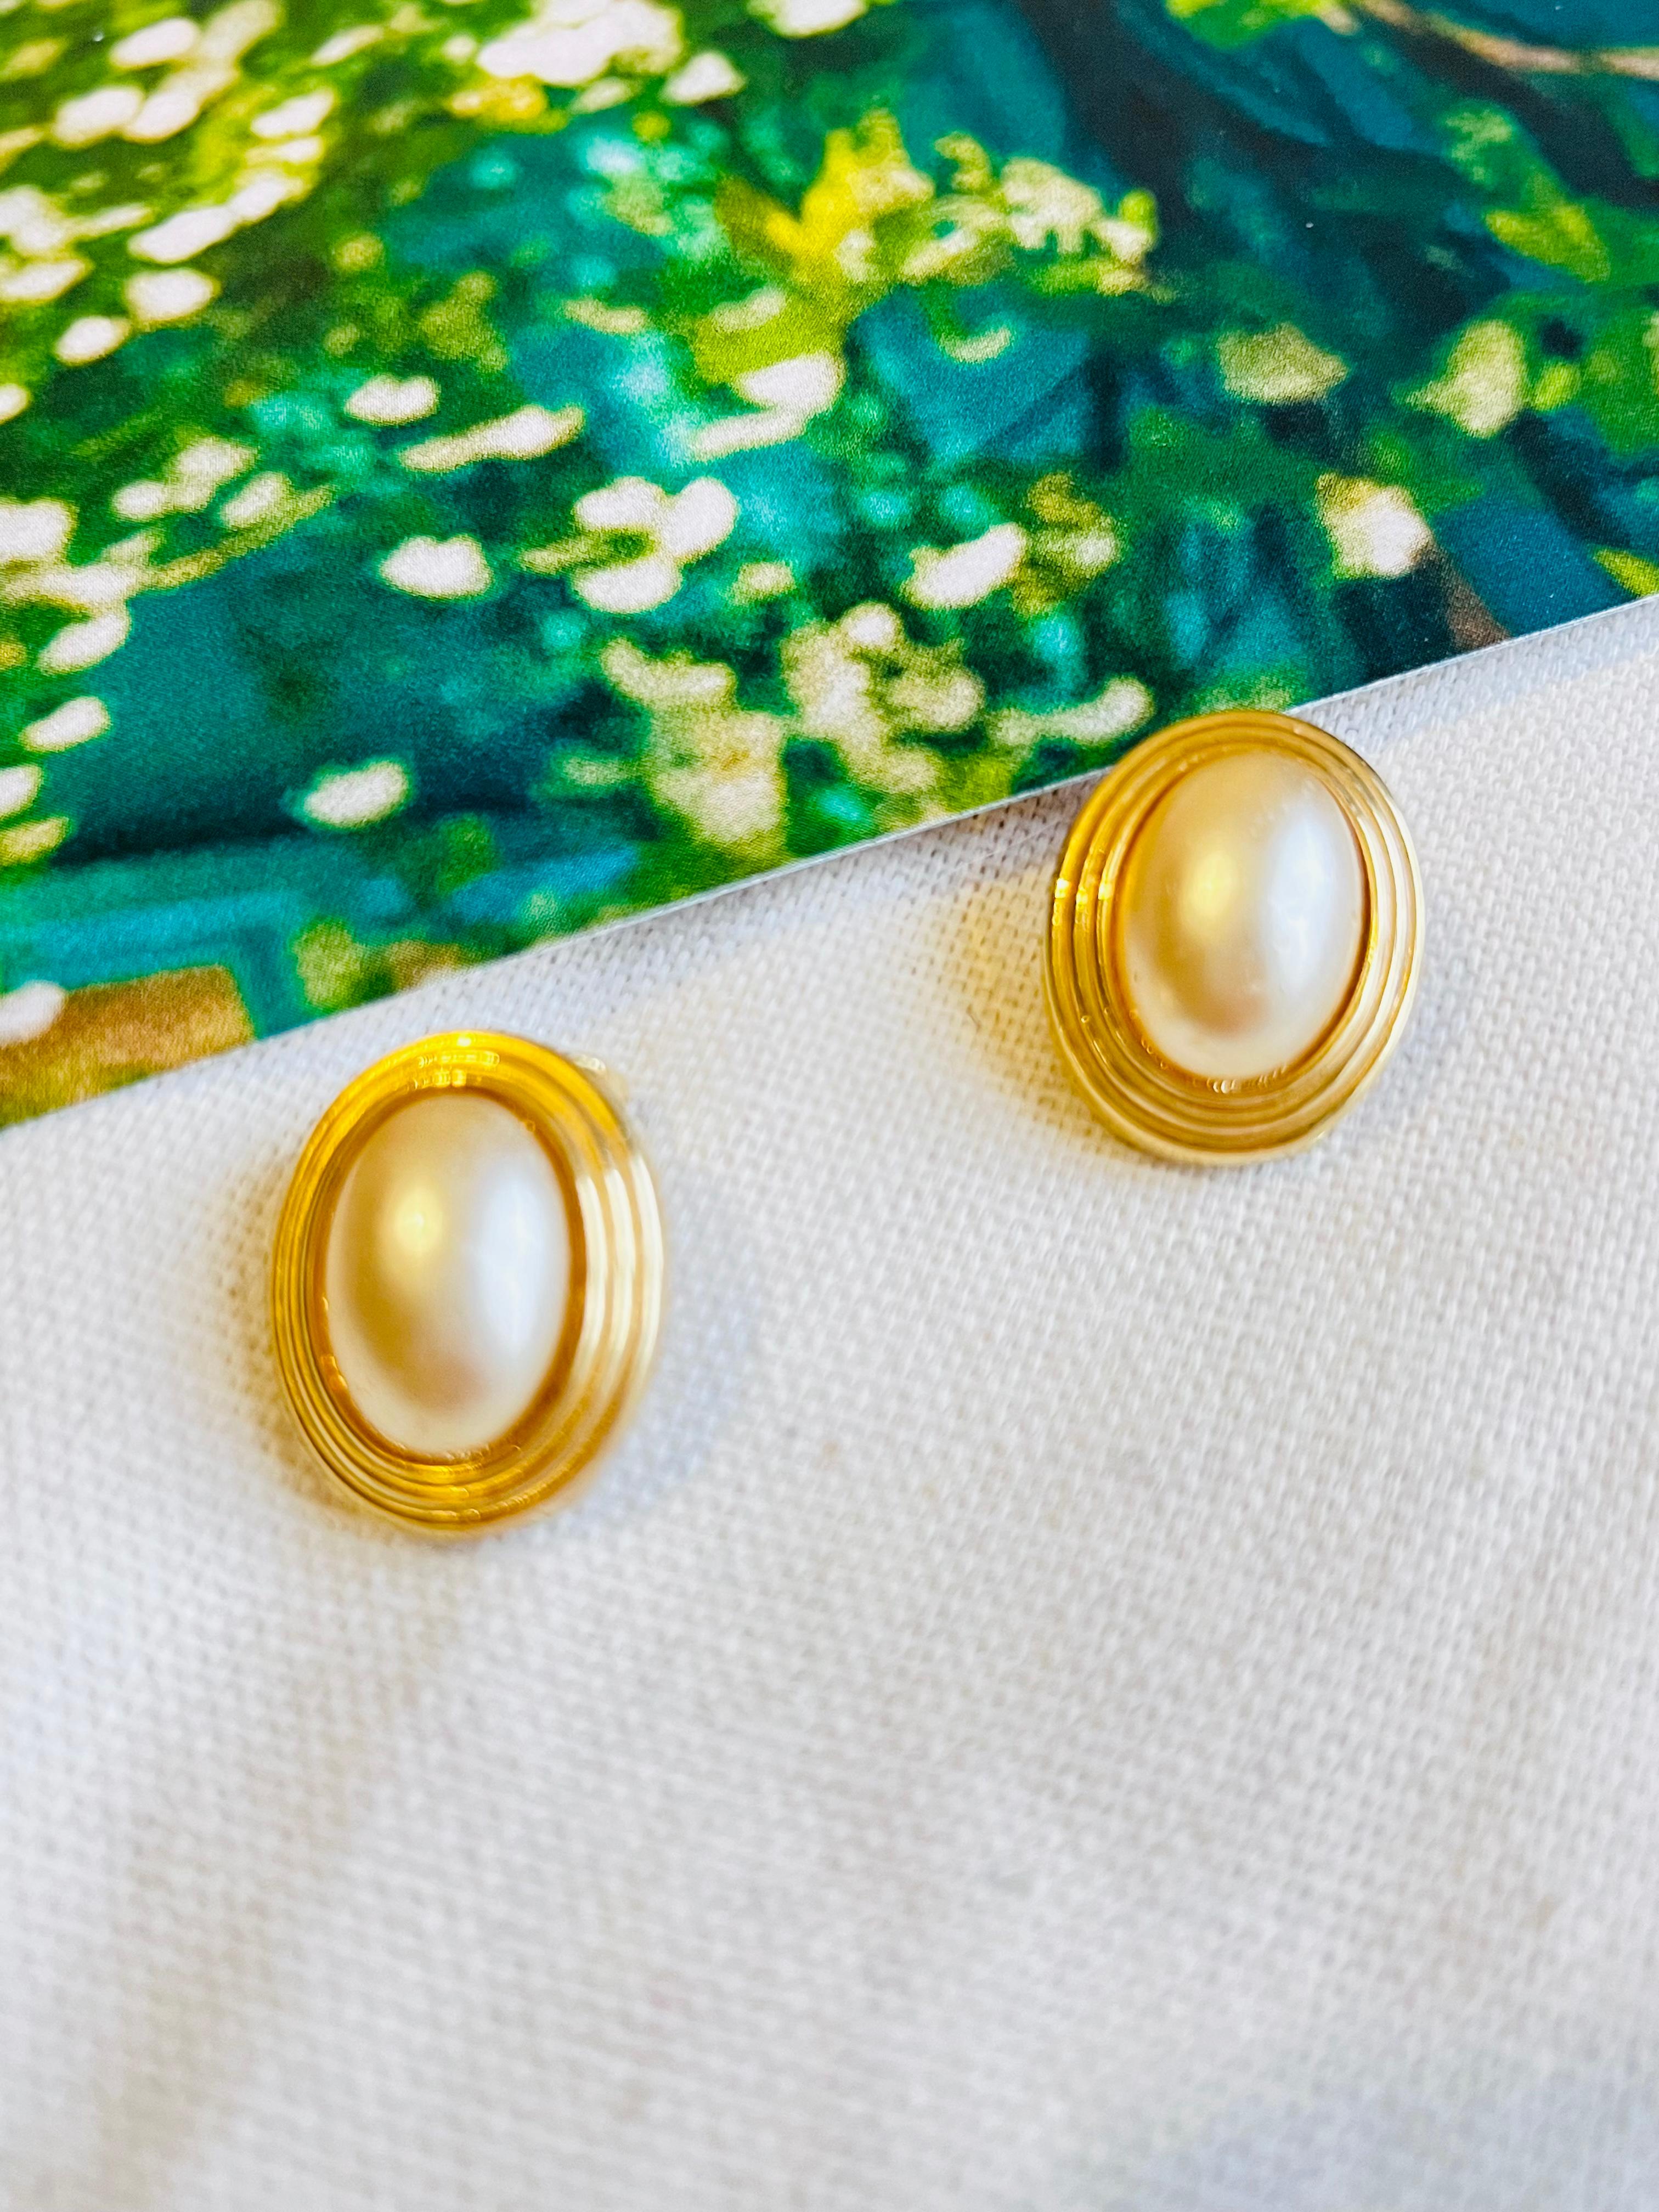 Very good condition. 100% Genuine.

A very beautiful pair of faux pearl earrings by Chr. DIOR, signed at the back. 

Size: 2.0*1.6 cm.

Weight: 6.0 g/each.

_ _ _

Great for everyday wear. Come with velvet pouch and beautiful package.

Makes the